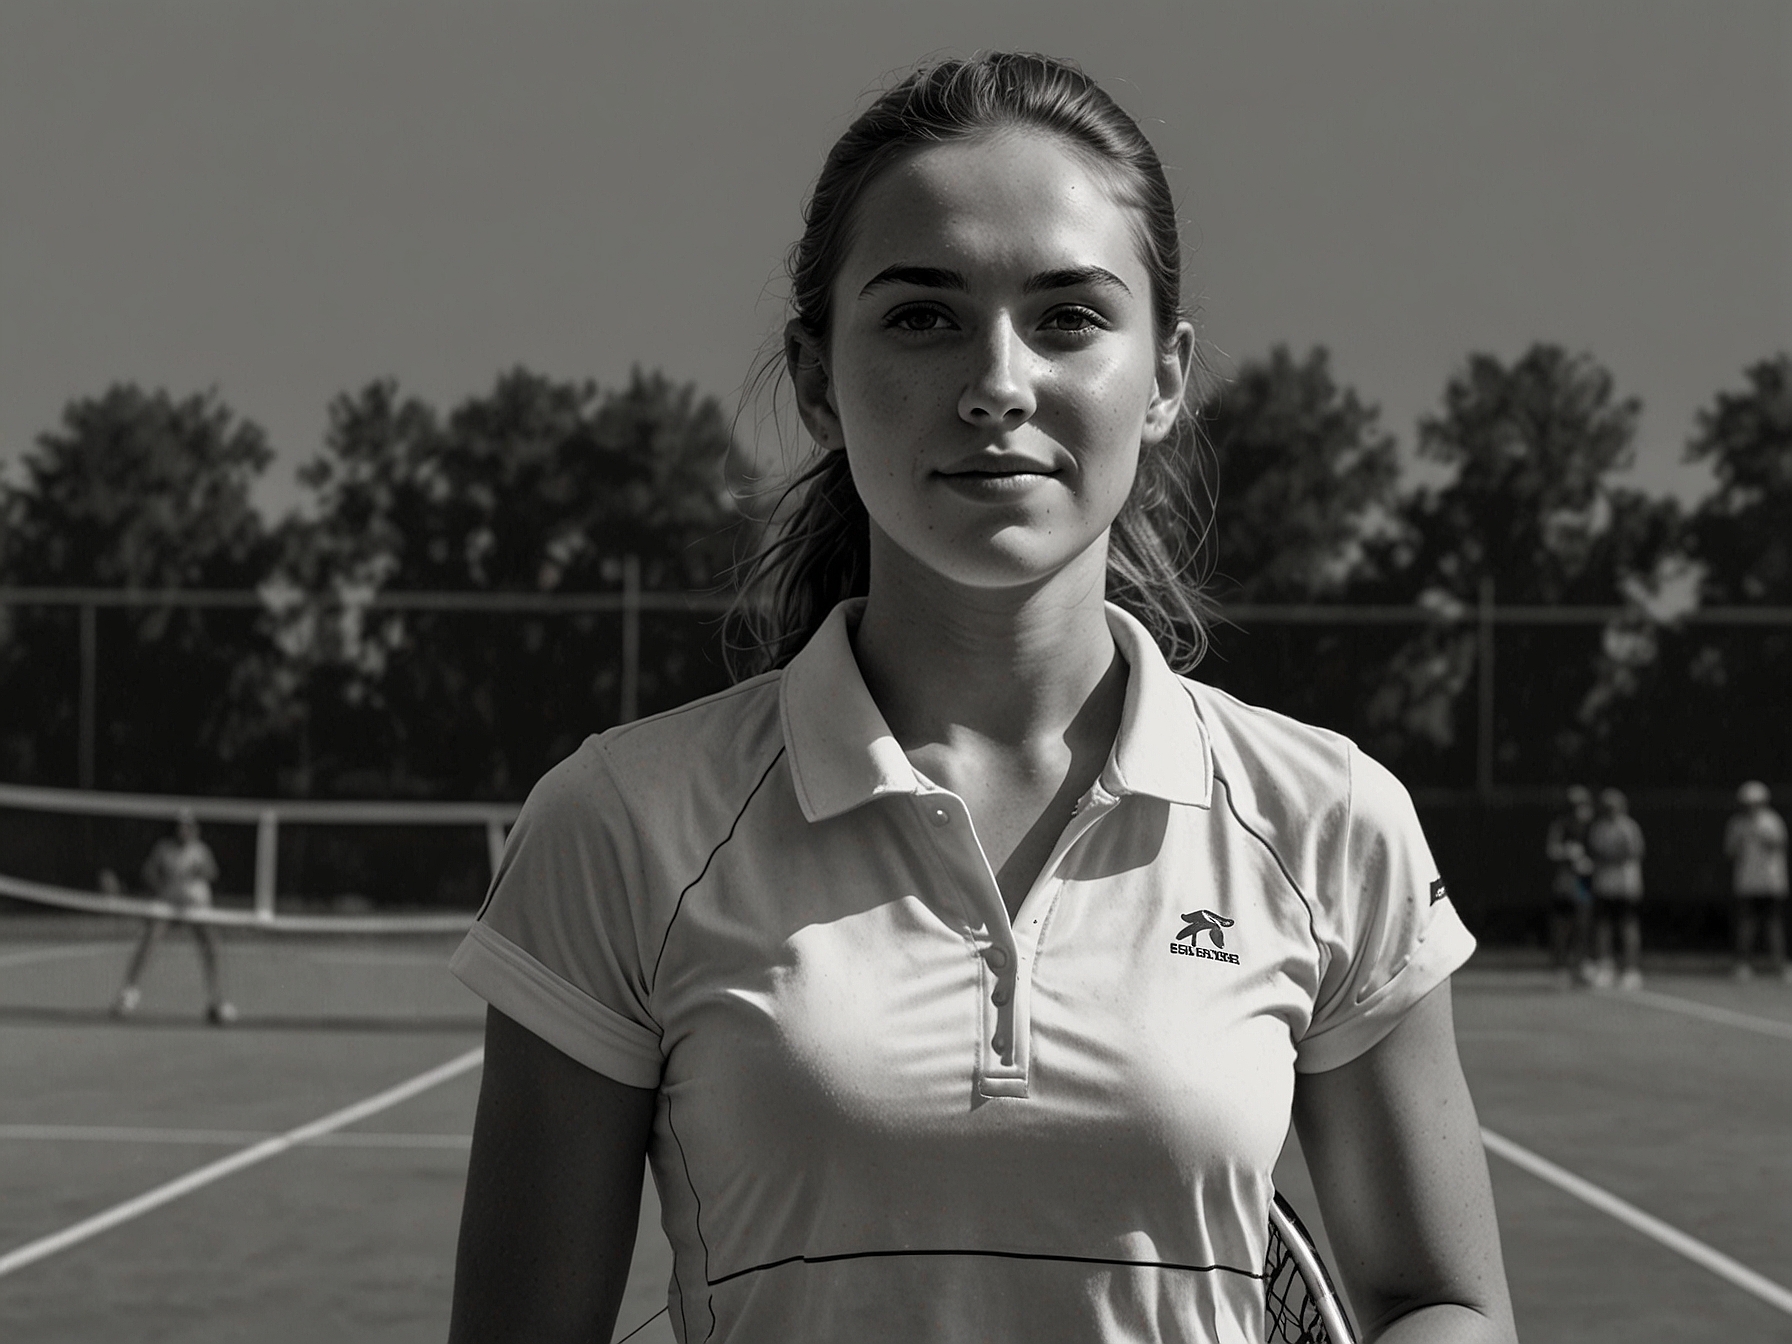 Hannah Berner in her tennis gear, holding a racket and posing on a tennis court, showcasing her early dedication to the sport and her journey as an almost-professional player.